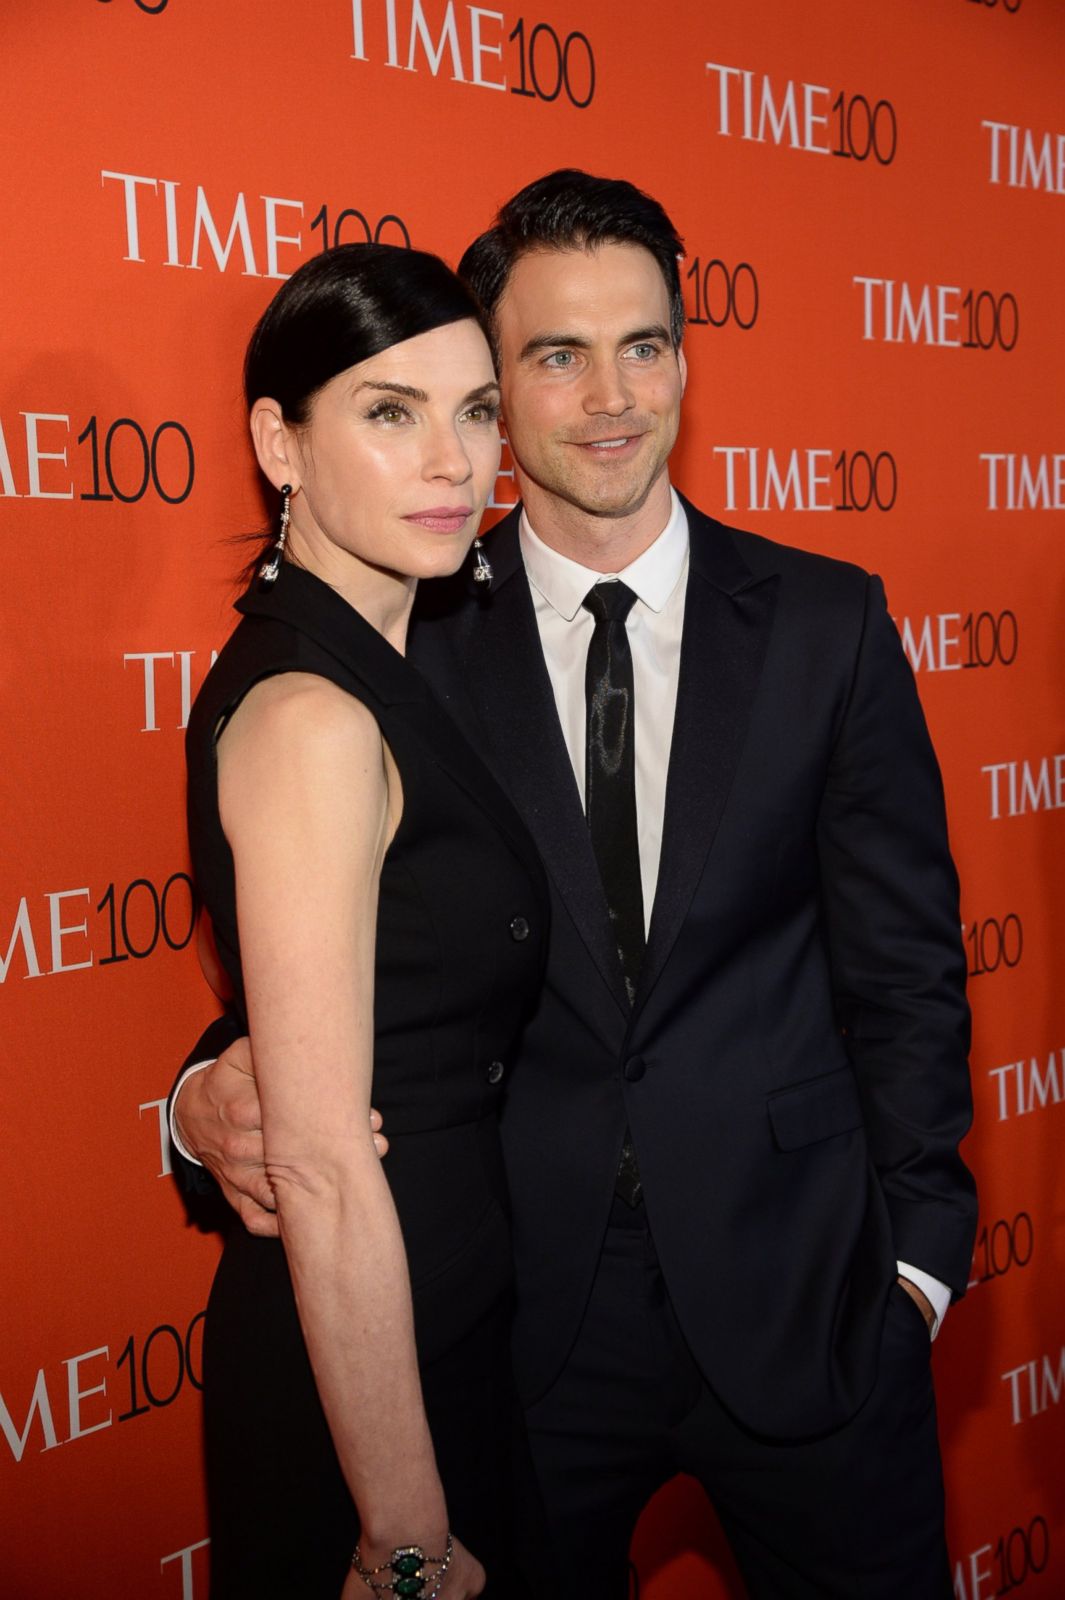 Julianna Margulies and Her Husband Hit the Red Carpet Picture | April's ...